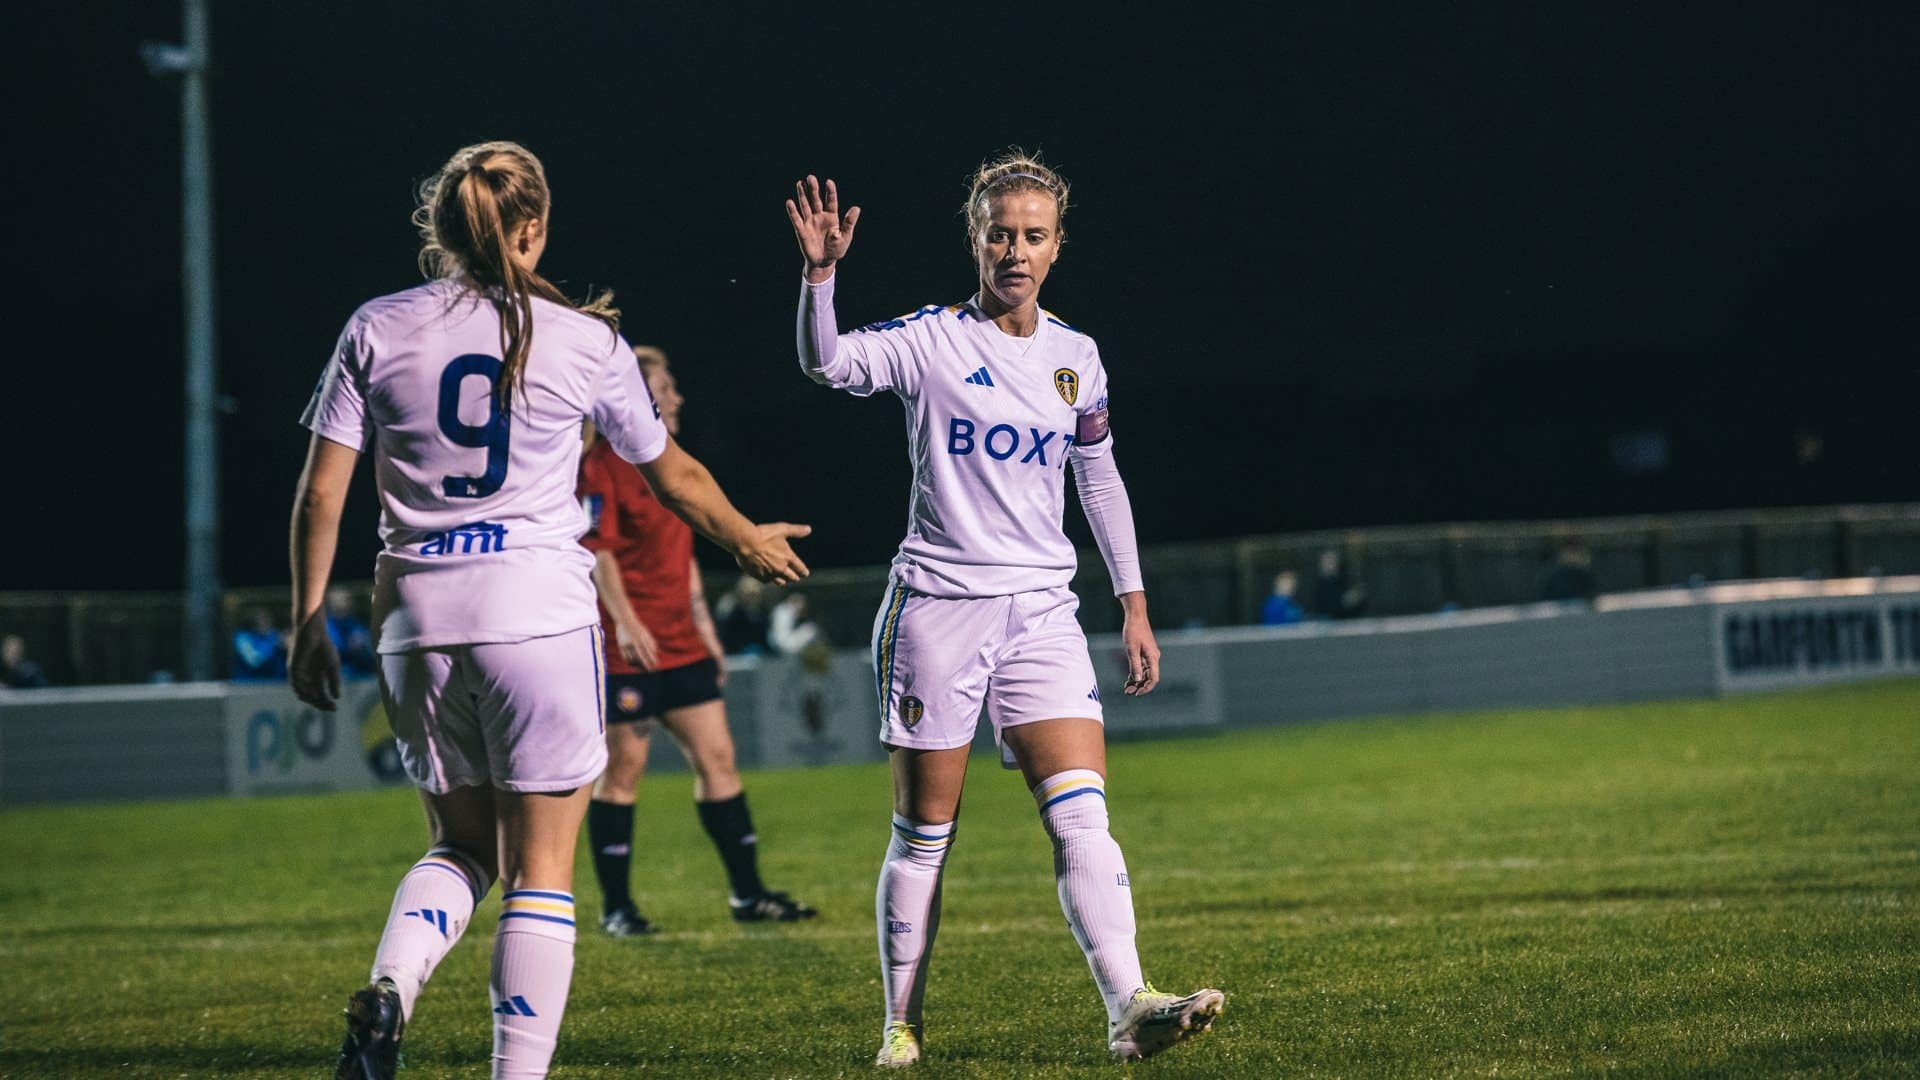 Leeds United captain Olivia Smart doing what defenders do best: high-fiving a no.9